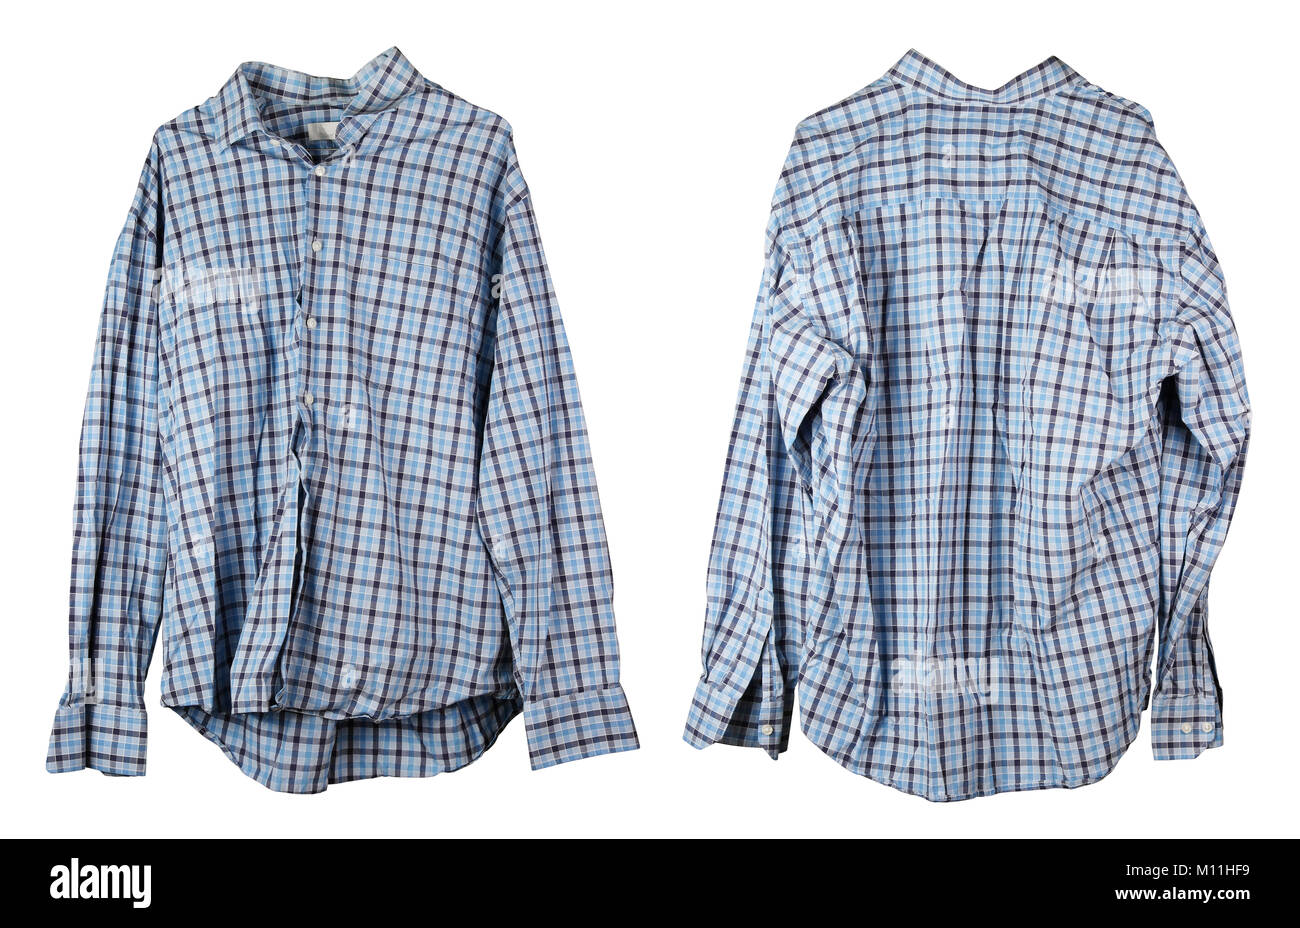 A crumpled old checkered blue man's shirt hangs on a hanger. View from two sides. Isolated on white studio set Stock Photo